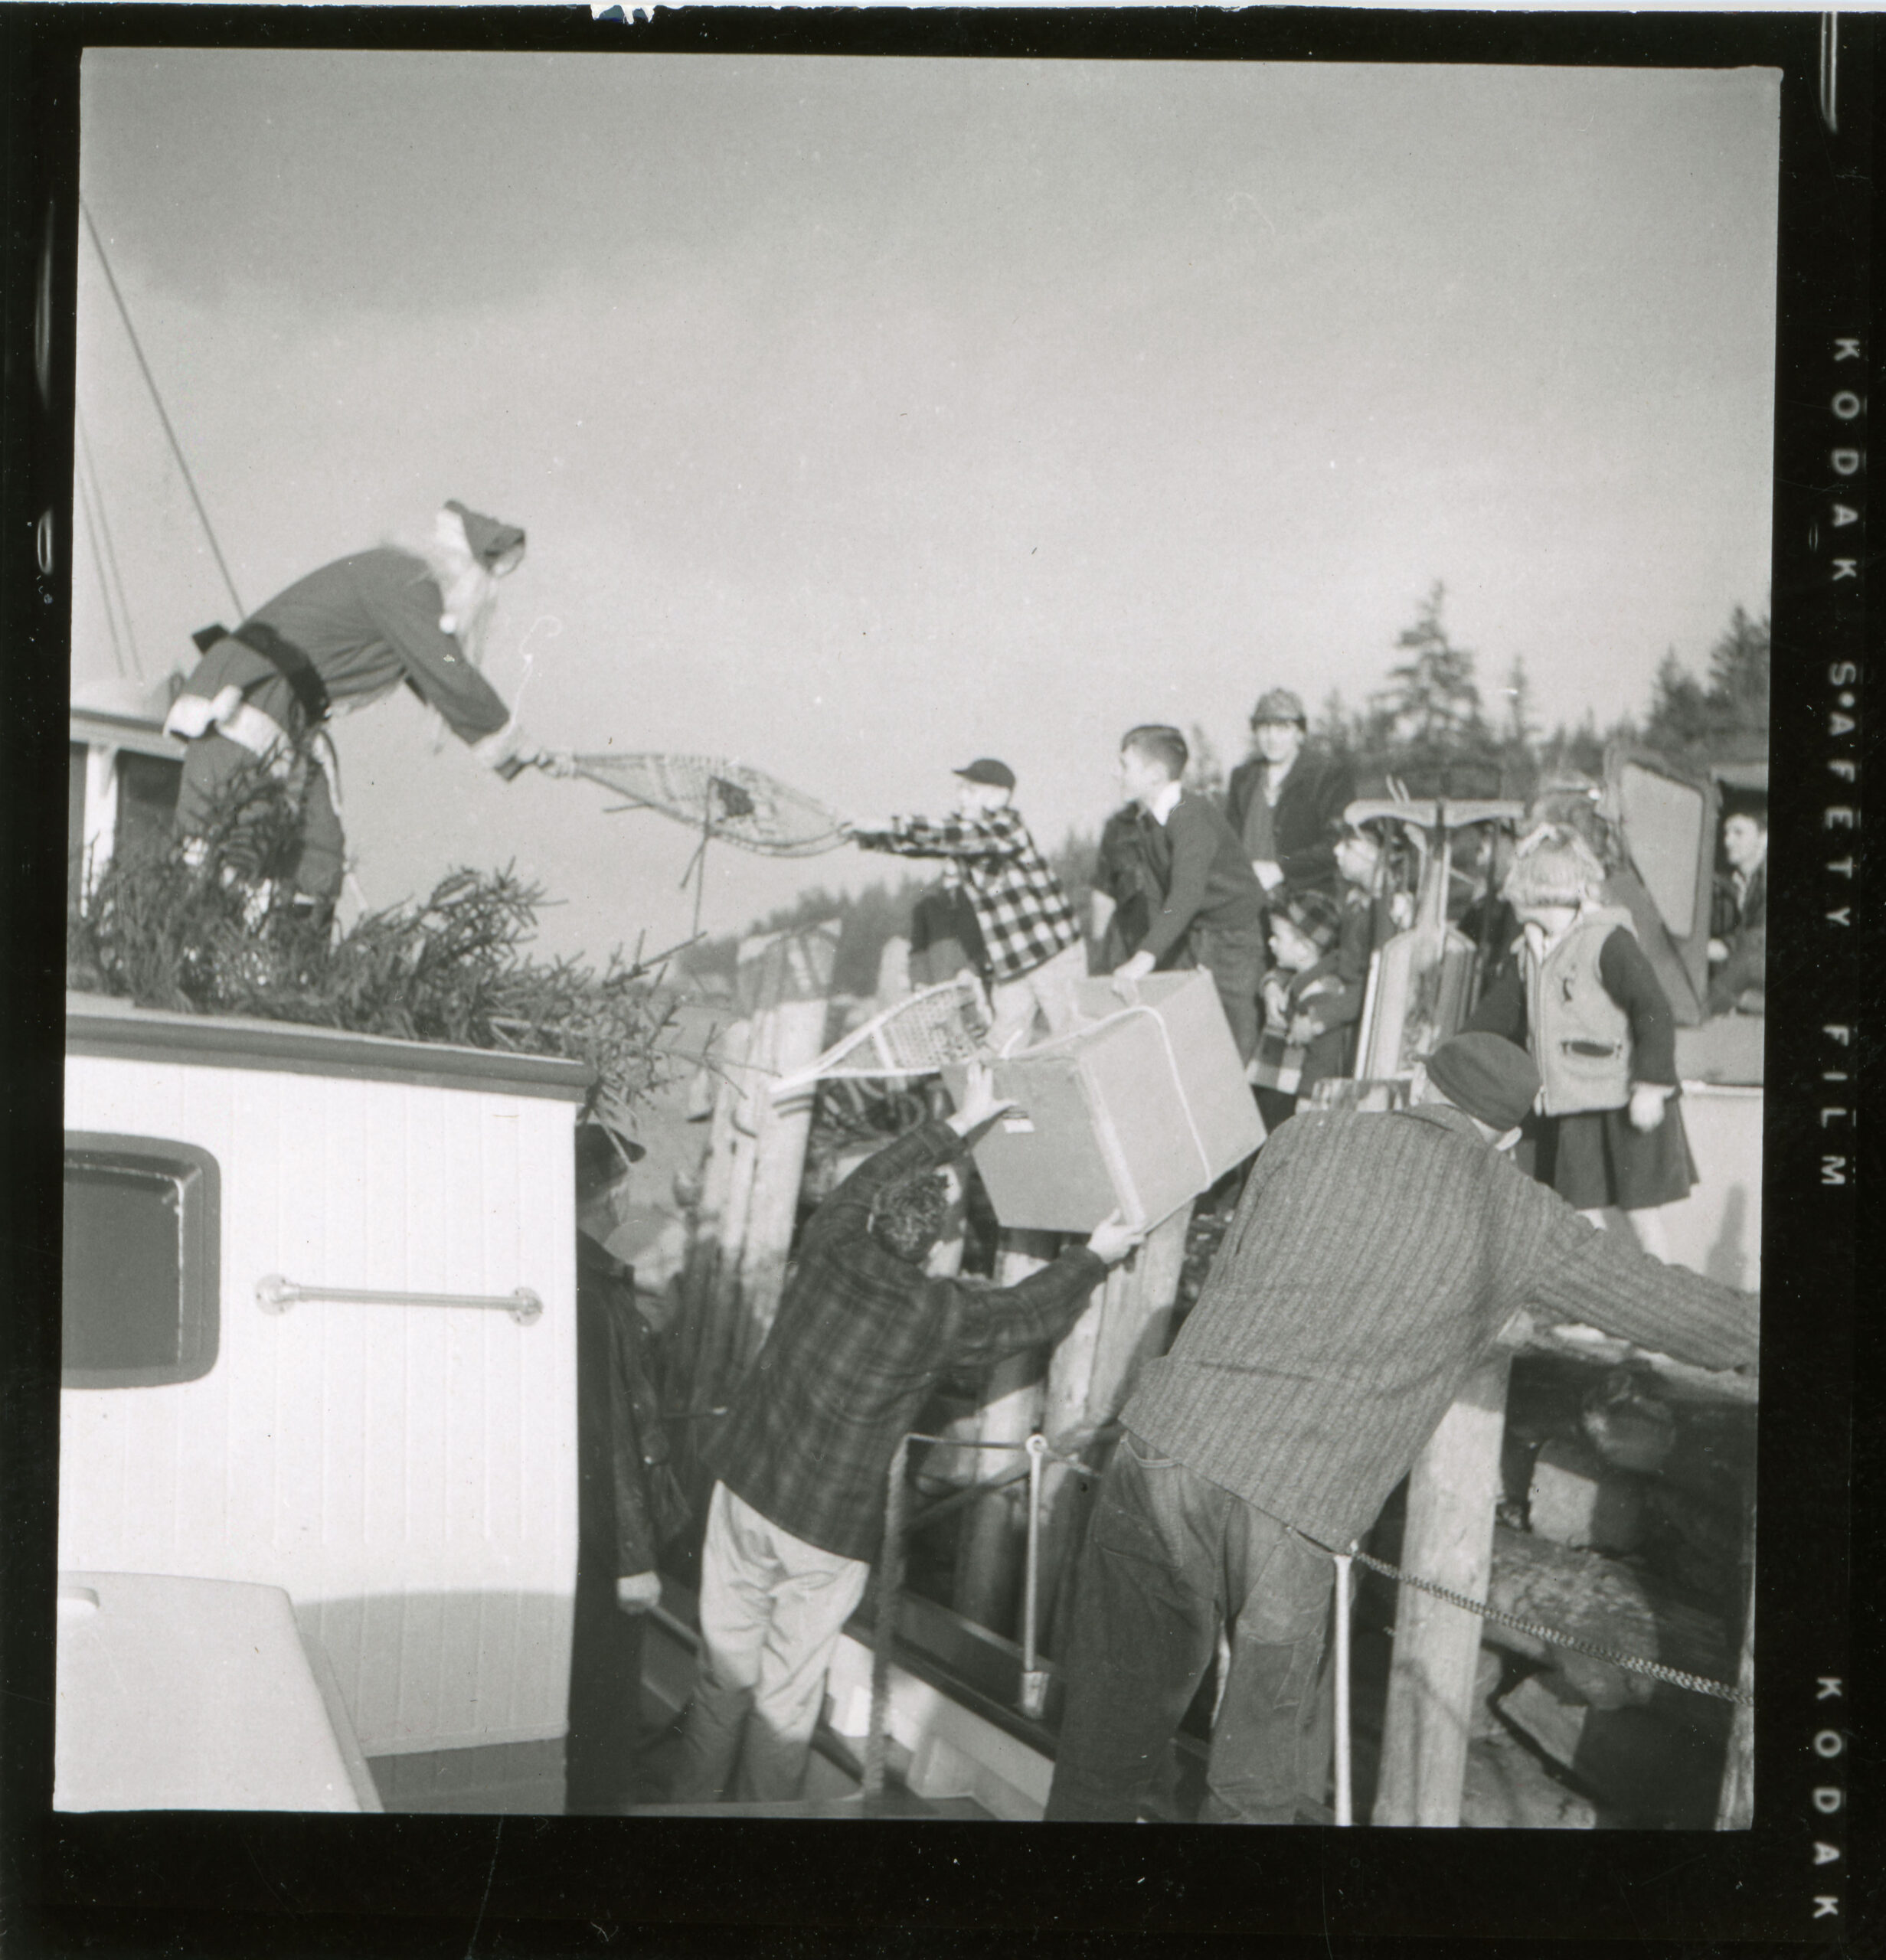 A black and white photo of a man dressed as Santa handing gifts off of a boat